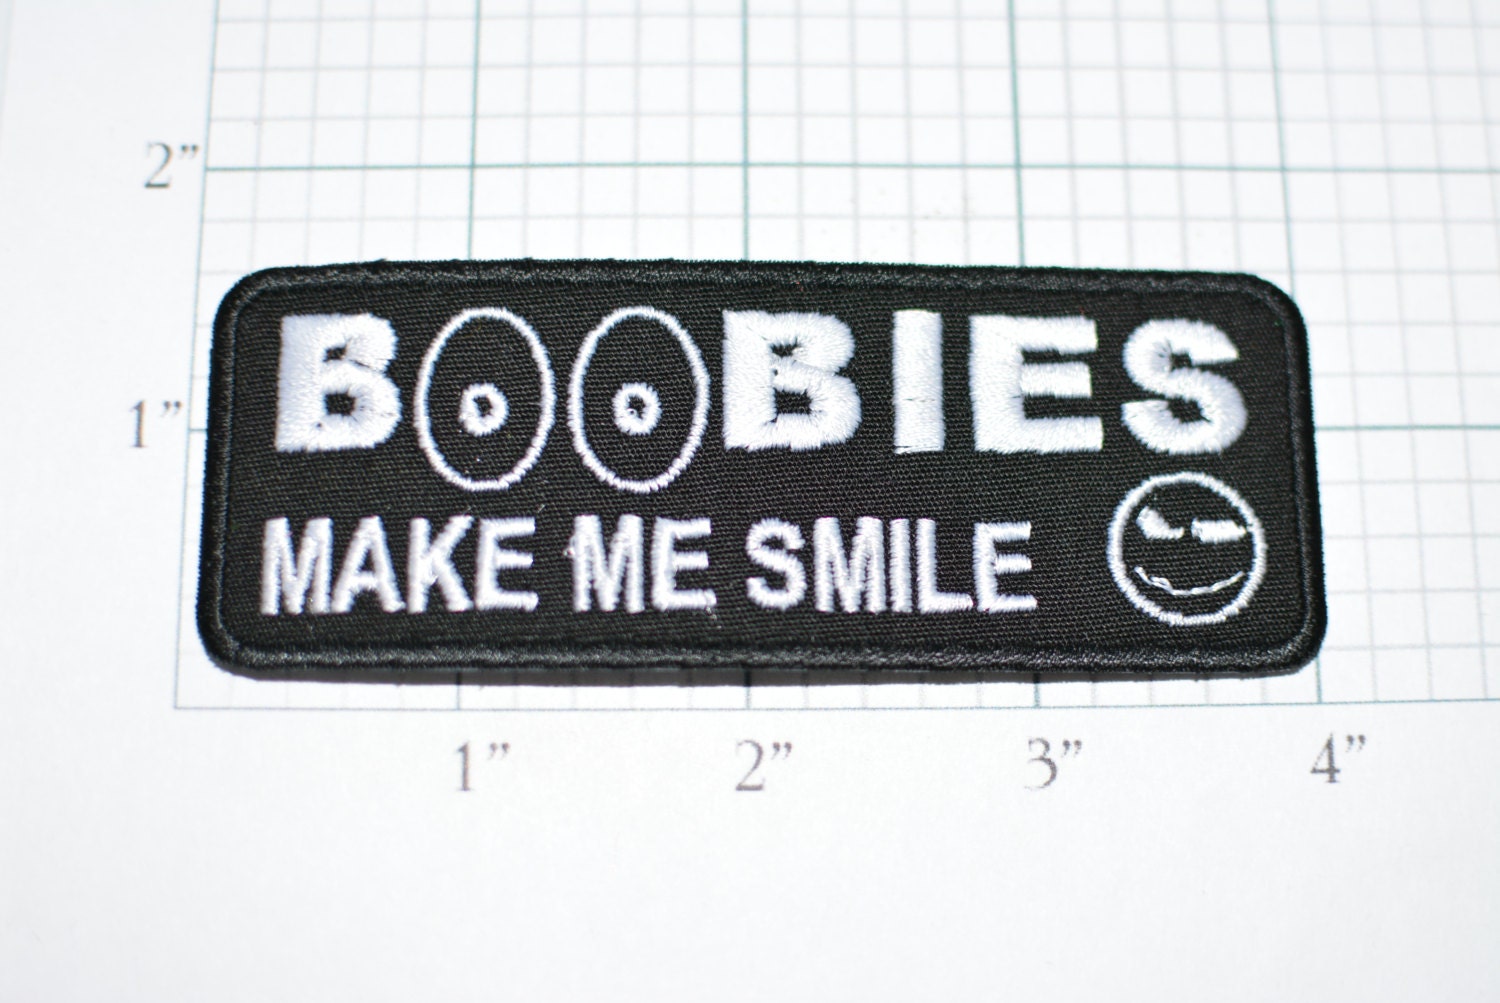 BOOBIES Make Me Smile, Funny Iron-on Patch Applique Embroidered Clothing  Patch Biker Patch Motorcycle Black Jacket Patch Vest Patch ozx